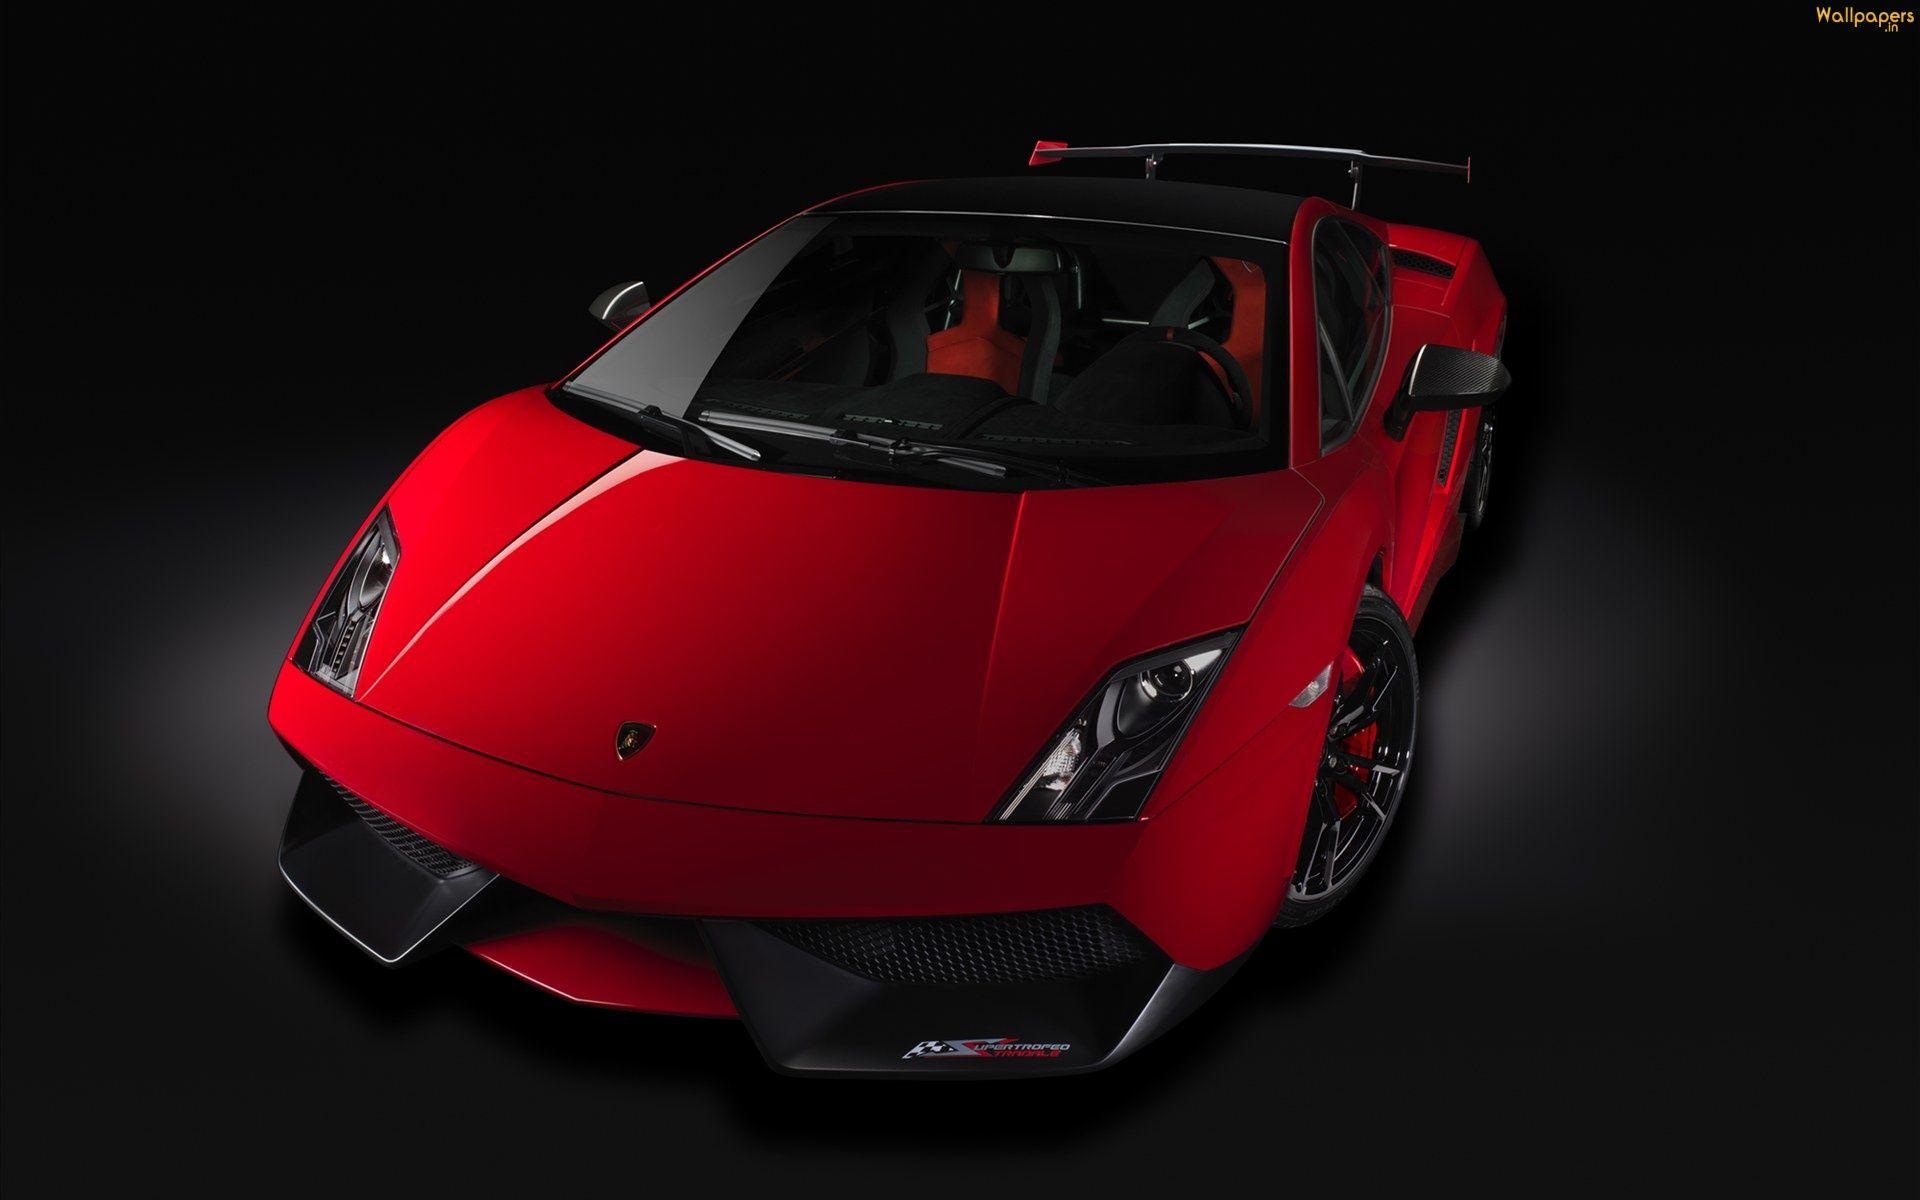 Black And Red Lamborghini Wallpaper 88 with Black And Red